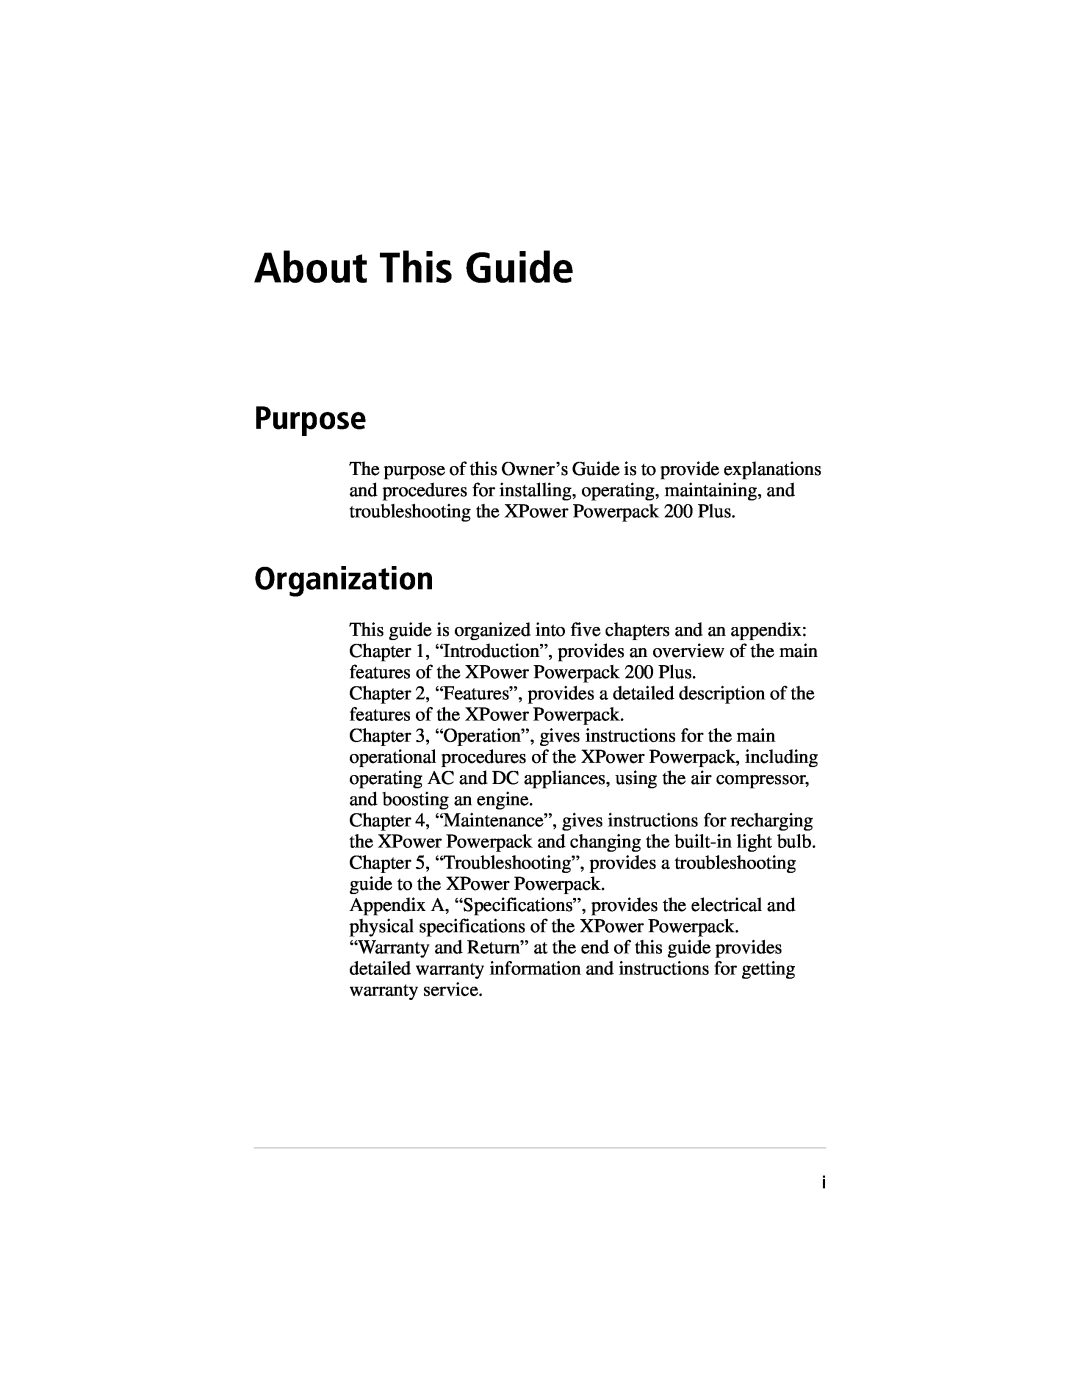 Xantrex Technology 400, 800 manual About This Guide, Purpose, Organization 